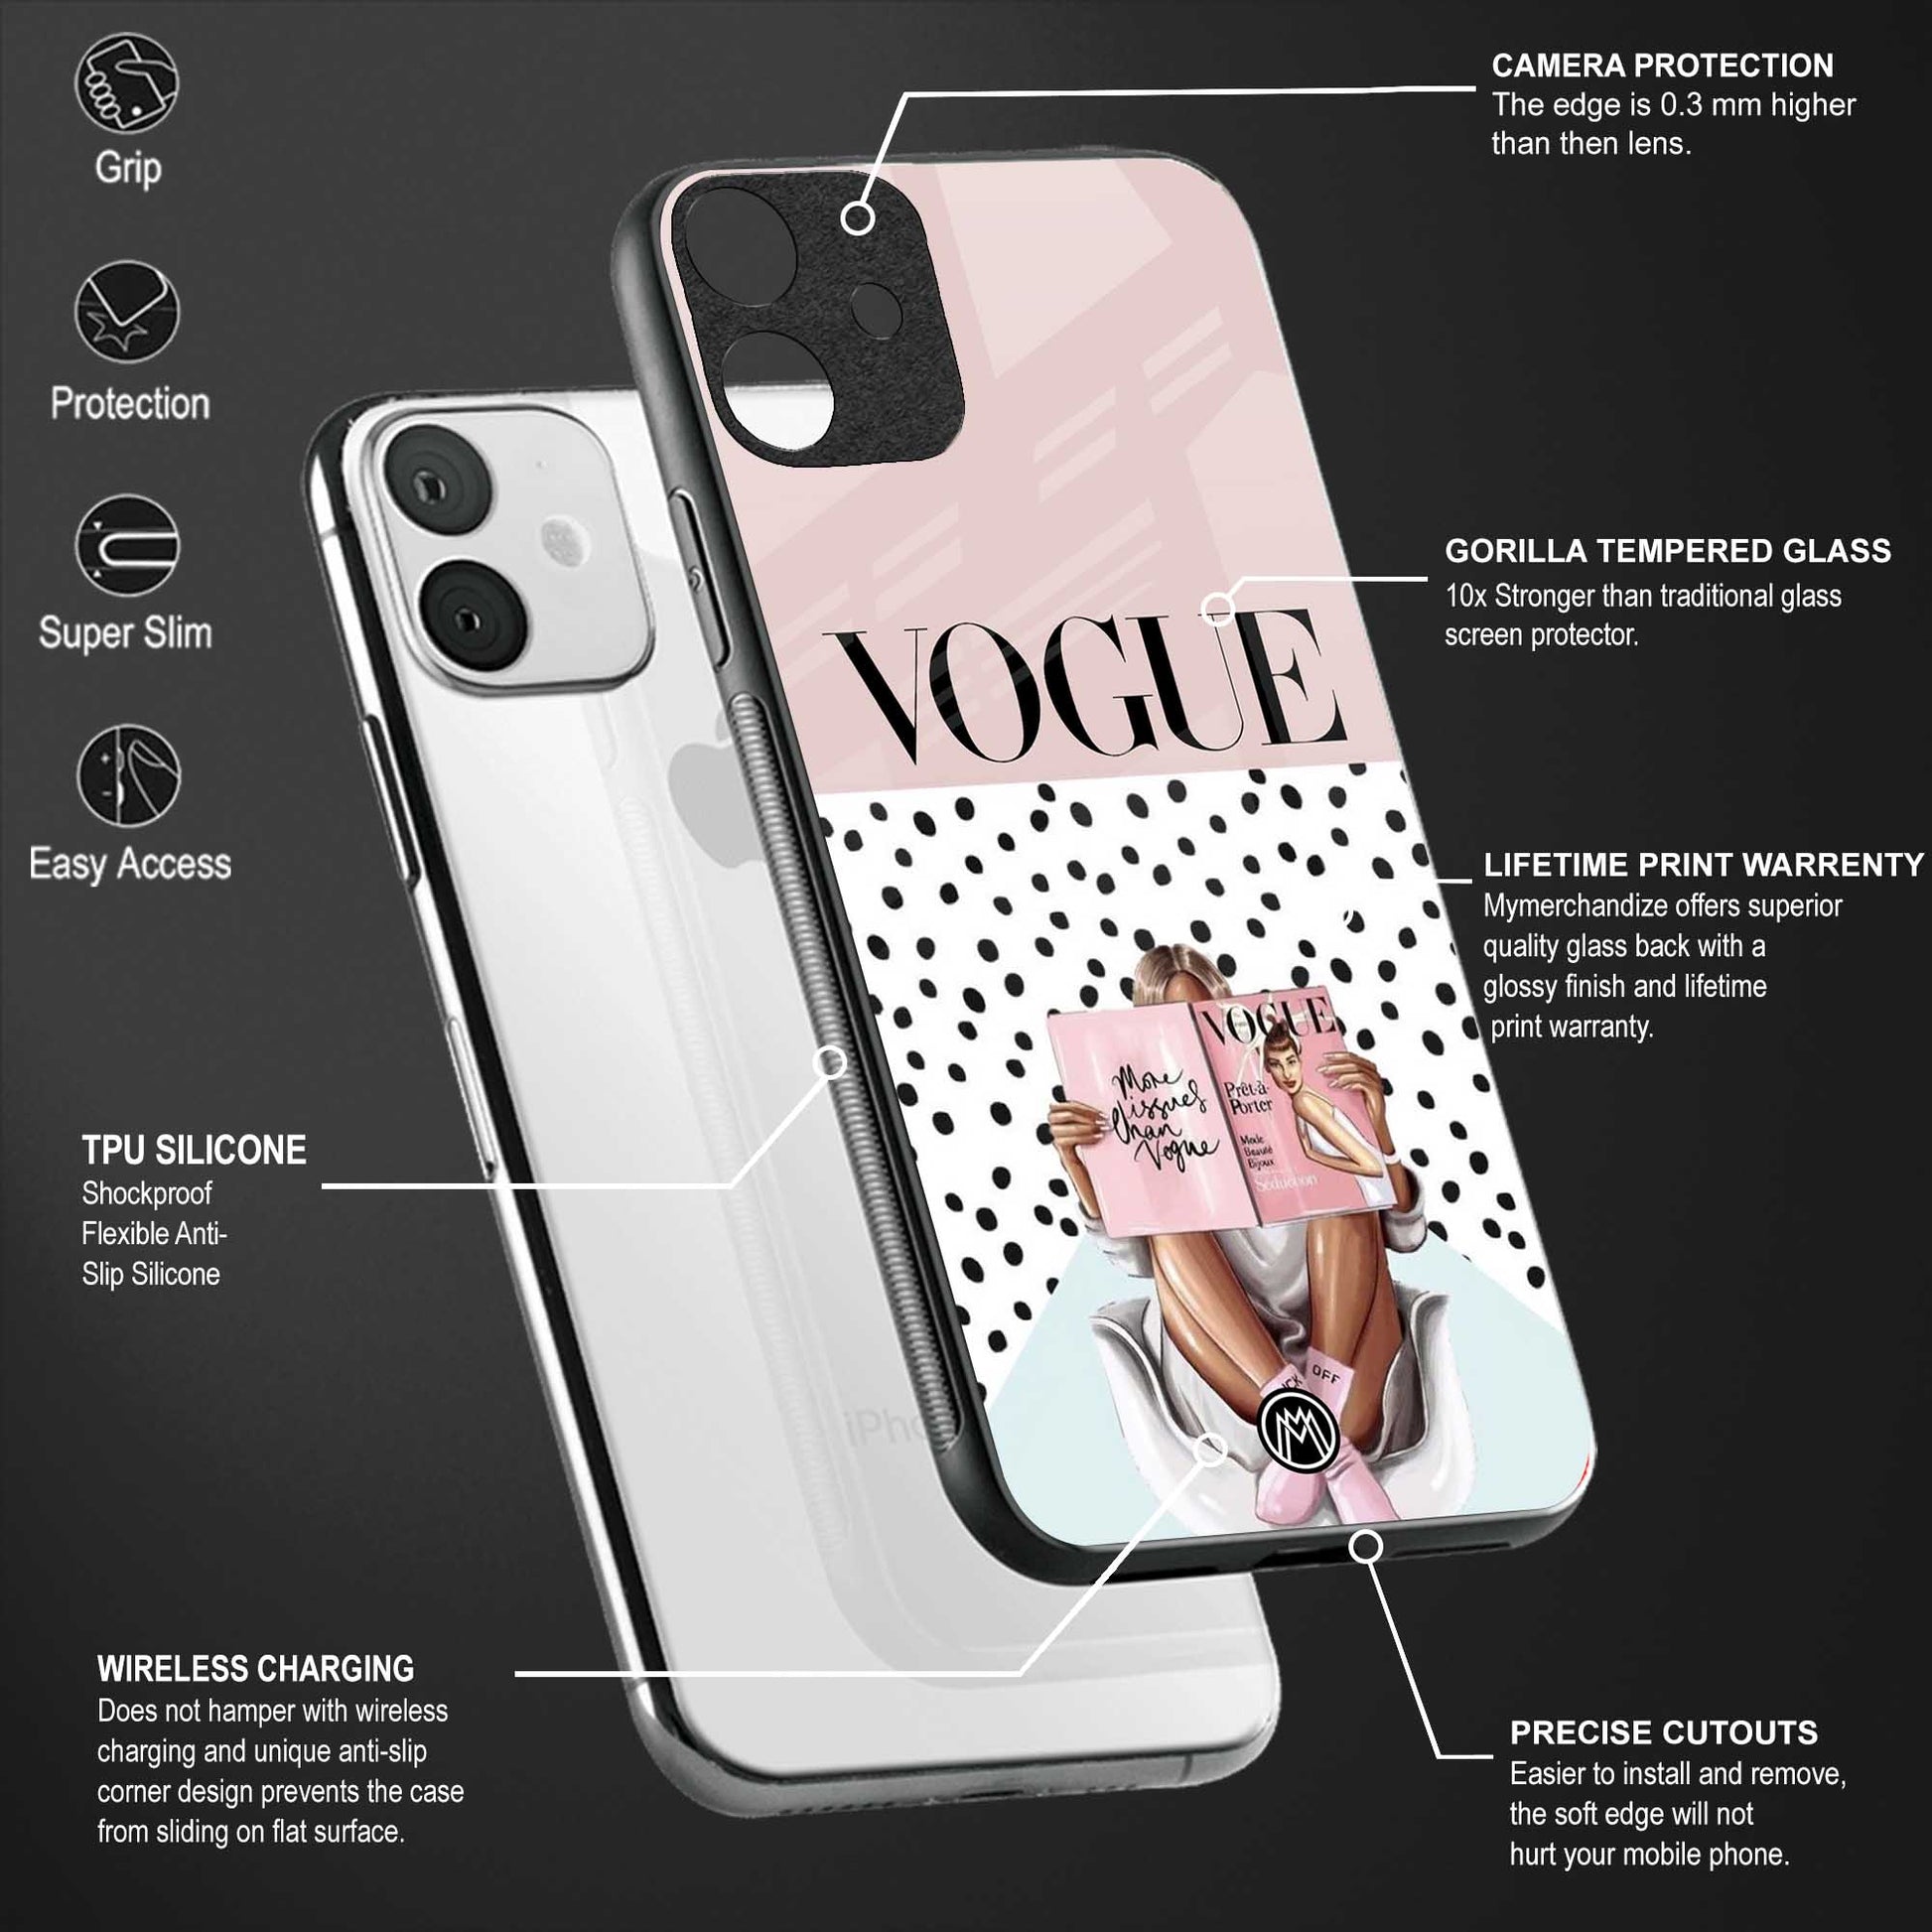 vogue queen glass case for iphone 12 mini image-4